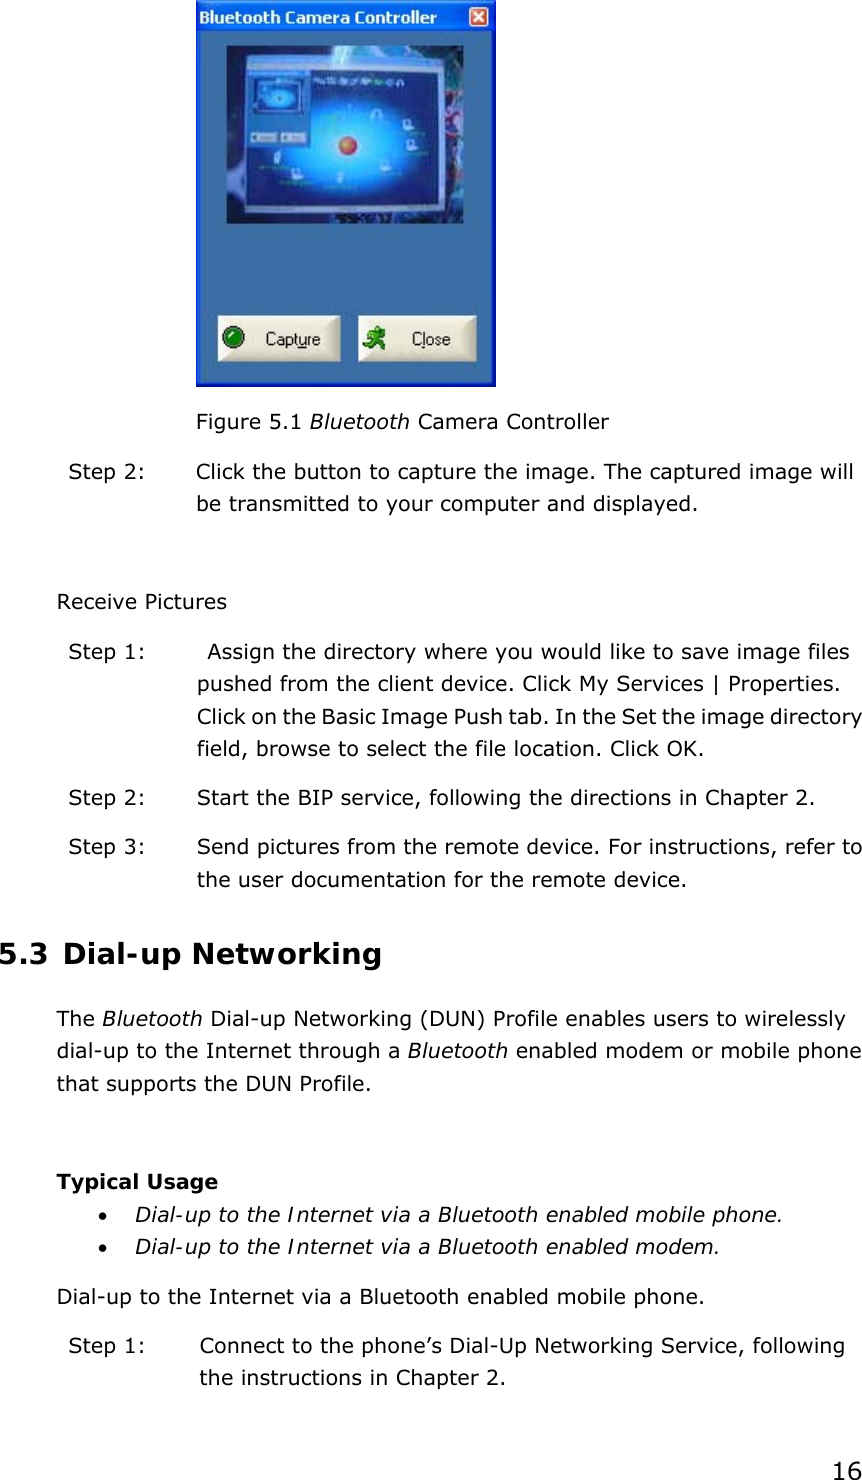 16  Figure 5.1 Bluetooth Camera Controller Step 2:  Click the button to capture the image. The captured image will be transmitted to your computer and displayed.  Receive Pictures Step 1:    Assign the directory where you would like to save image files pushed from the client device. Click My Services | Properties. Click on the Basic Image Push tab. In the Set the image directory field, browse to select the file location. Click OK. Step 2:  Start the BIP service, following the directions in Chapter 2. Step 3:  Send pictures from the remote device. For instructions, refer to the user documentation for the remote device. 5.3 Dial-up Networking The Bluetooth Dial-up Networking (DUN) Profile enables users to wirelessly dial-up to the Internet through a Bluetooth enabled modem or mobile phone that supports the DUN Profile.  Typical Usage • Dial-up to the Internet via a Bluetooth enabled mobile phone. • Dial-up to the Internet via a Bluetooth enabled modem. Dial-up to the Internet via a Bluetooth enabled mobile phone. Step 1:  Connect to the phone’s Dial-Up Networking Service, following the instructions in Chapter 2. 